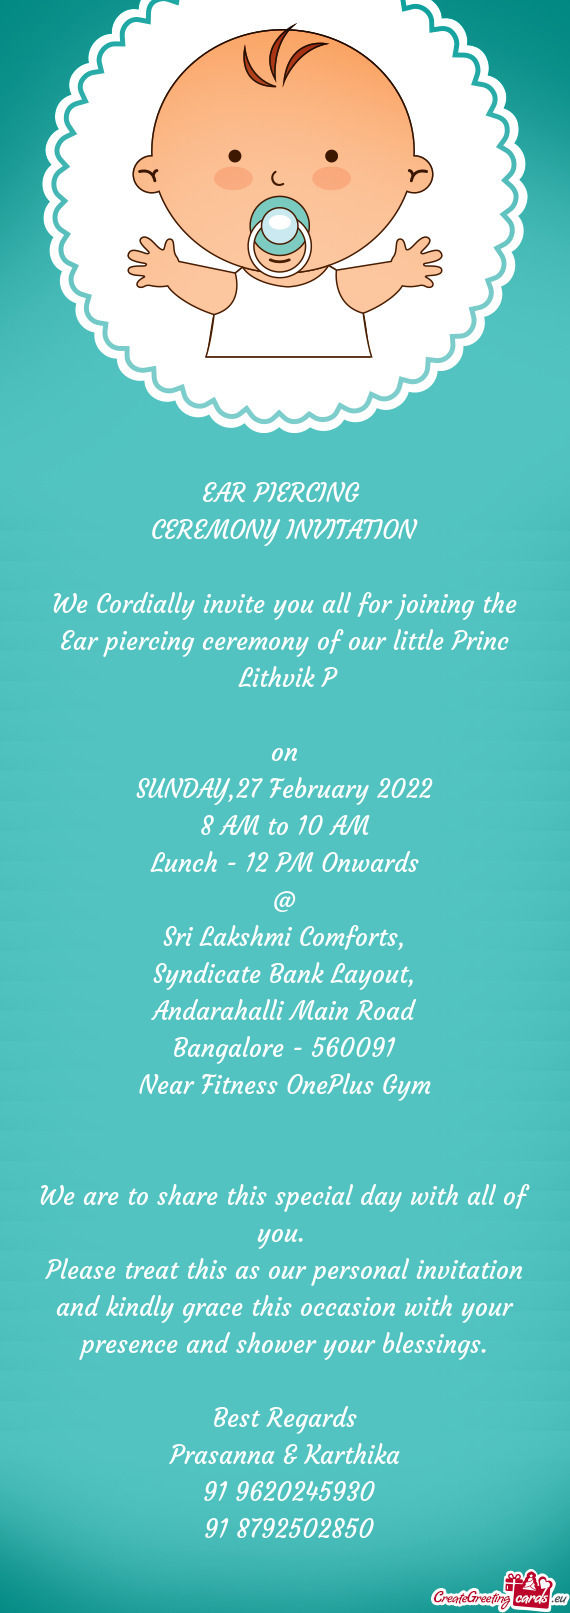 We Cordially invite you all for joining the Ear piercing ceremony of our little Princ